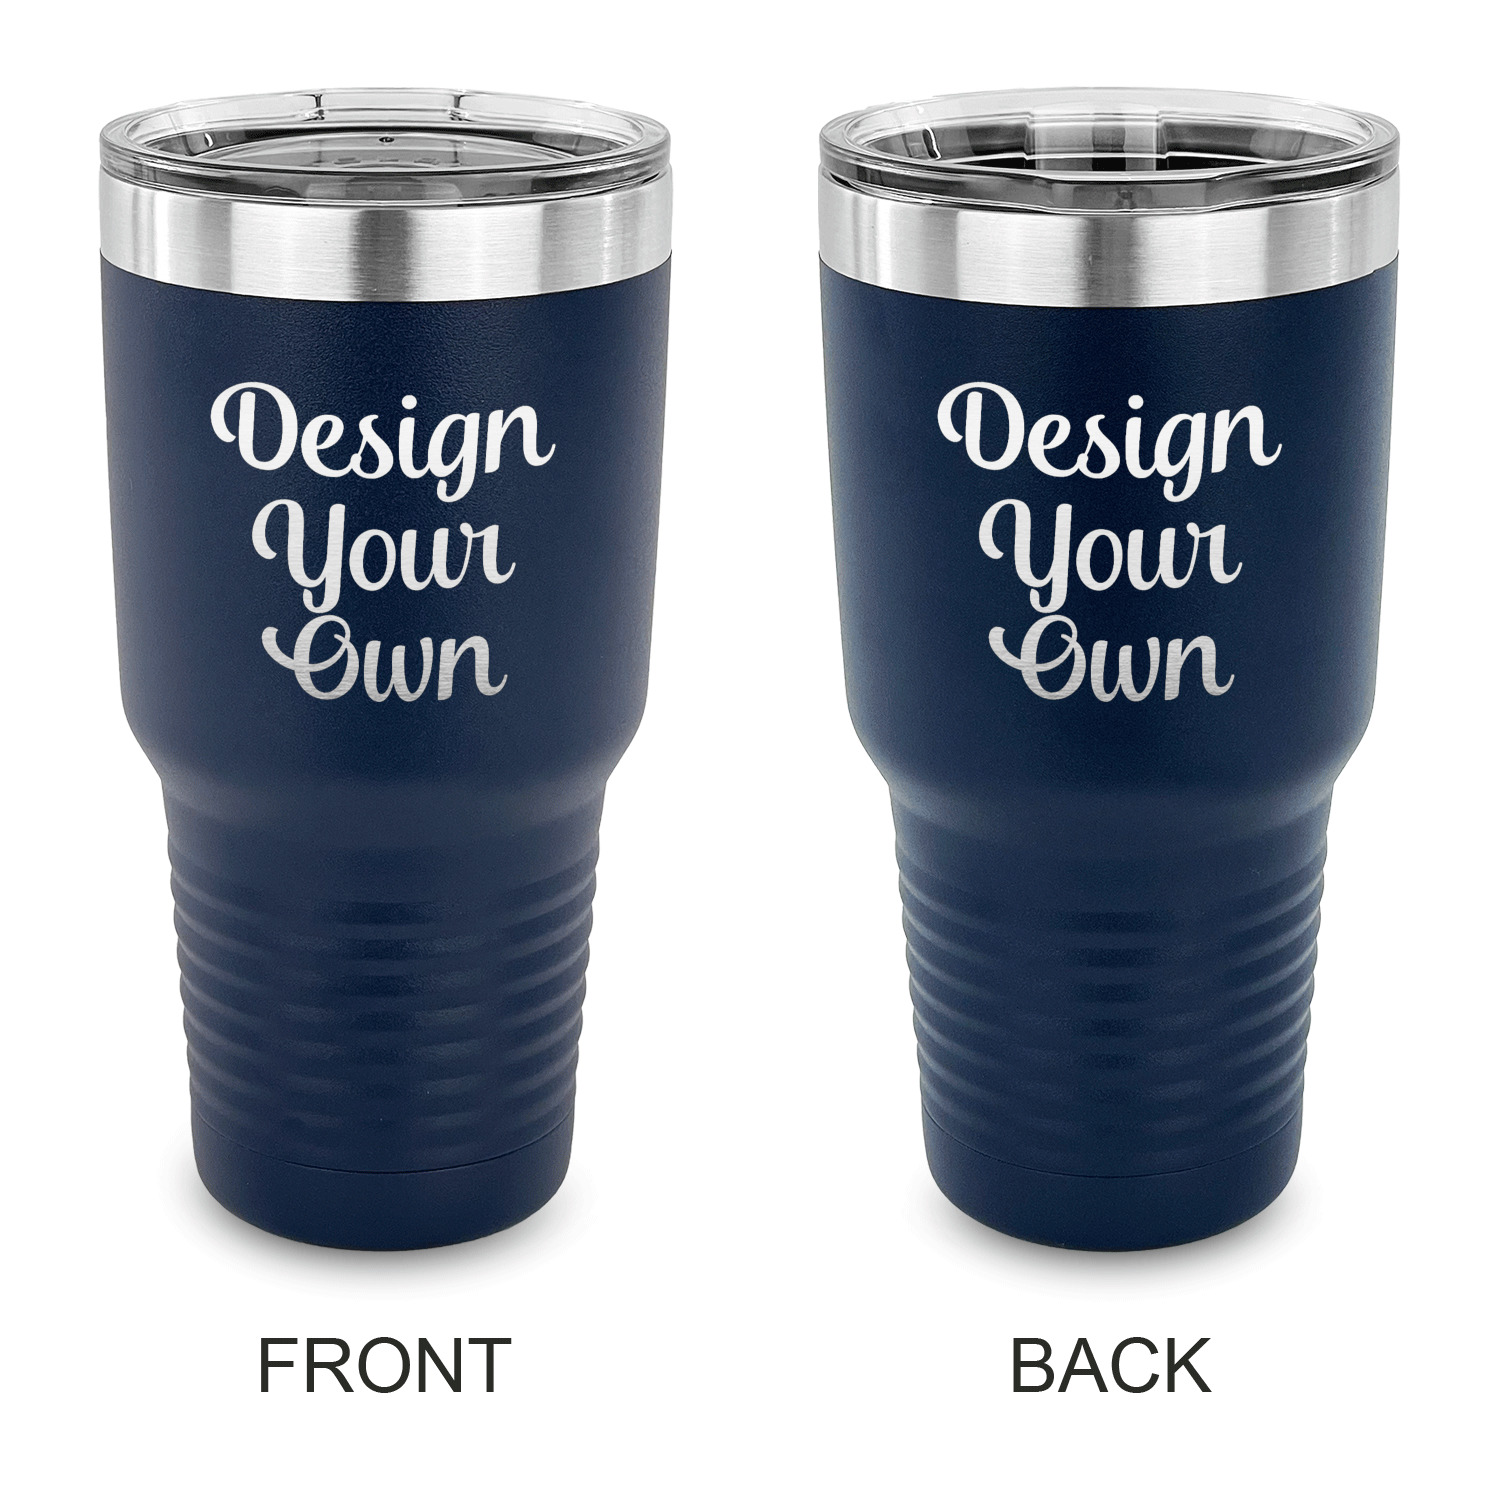 https://www.youcustomizeit.com/common/MAKE/965833/Design-Your-Own-30-oz-Stainless-Steel-Ringneck-Tumblers-Navy-Double-Sided-APPROVAL.jpg?lm=1633554073